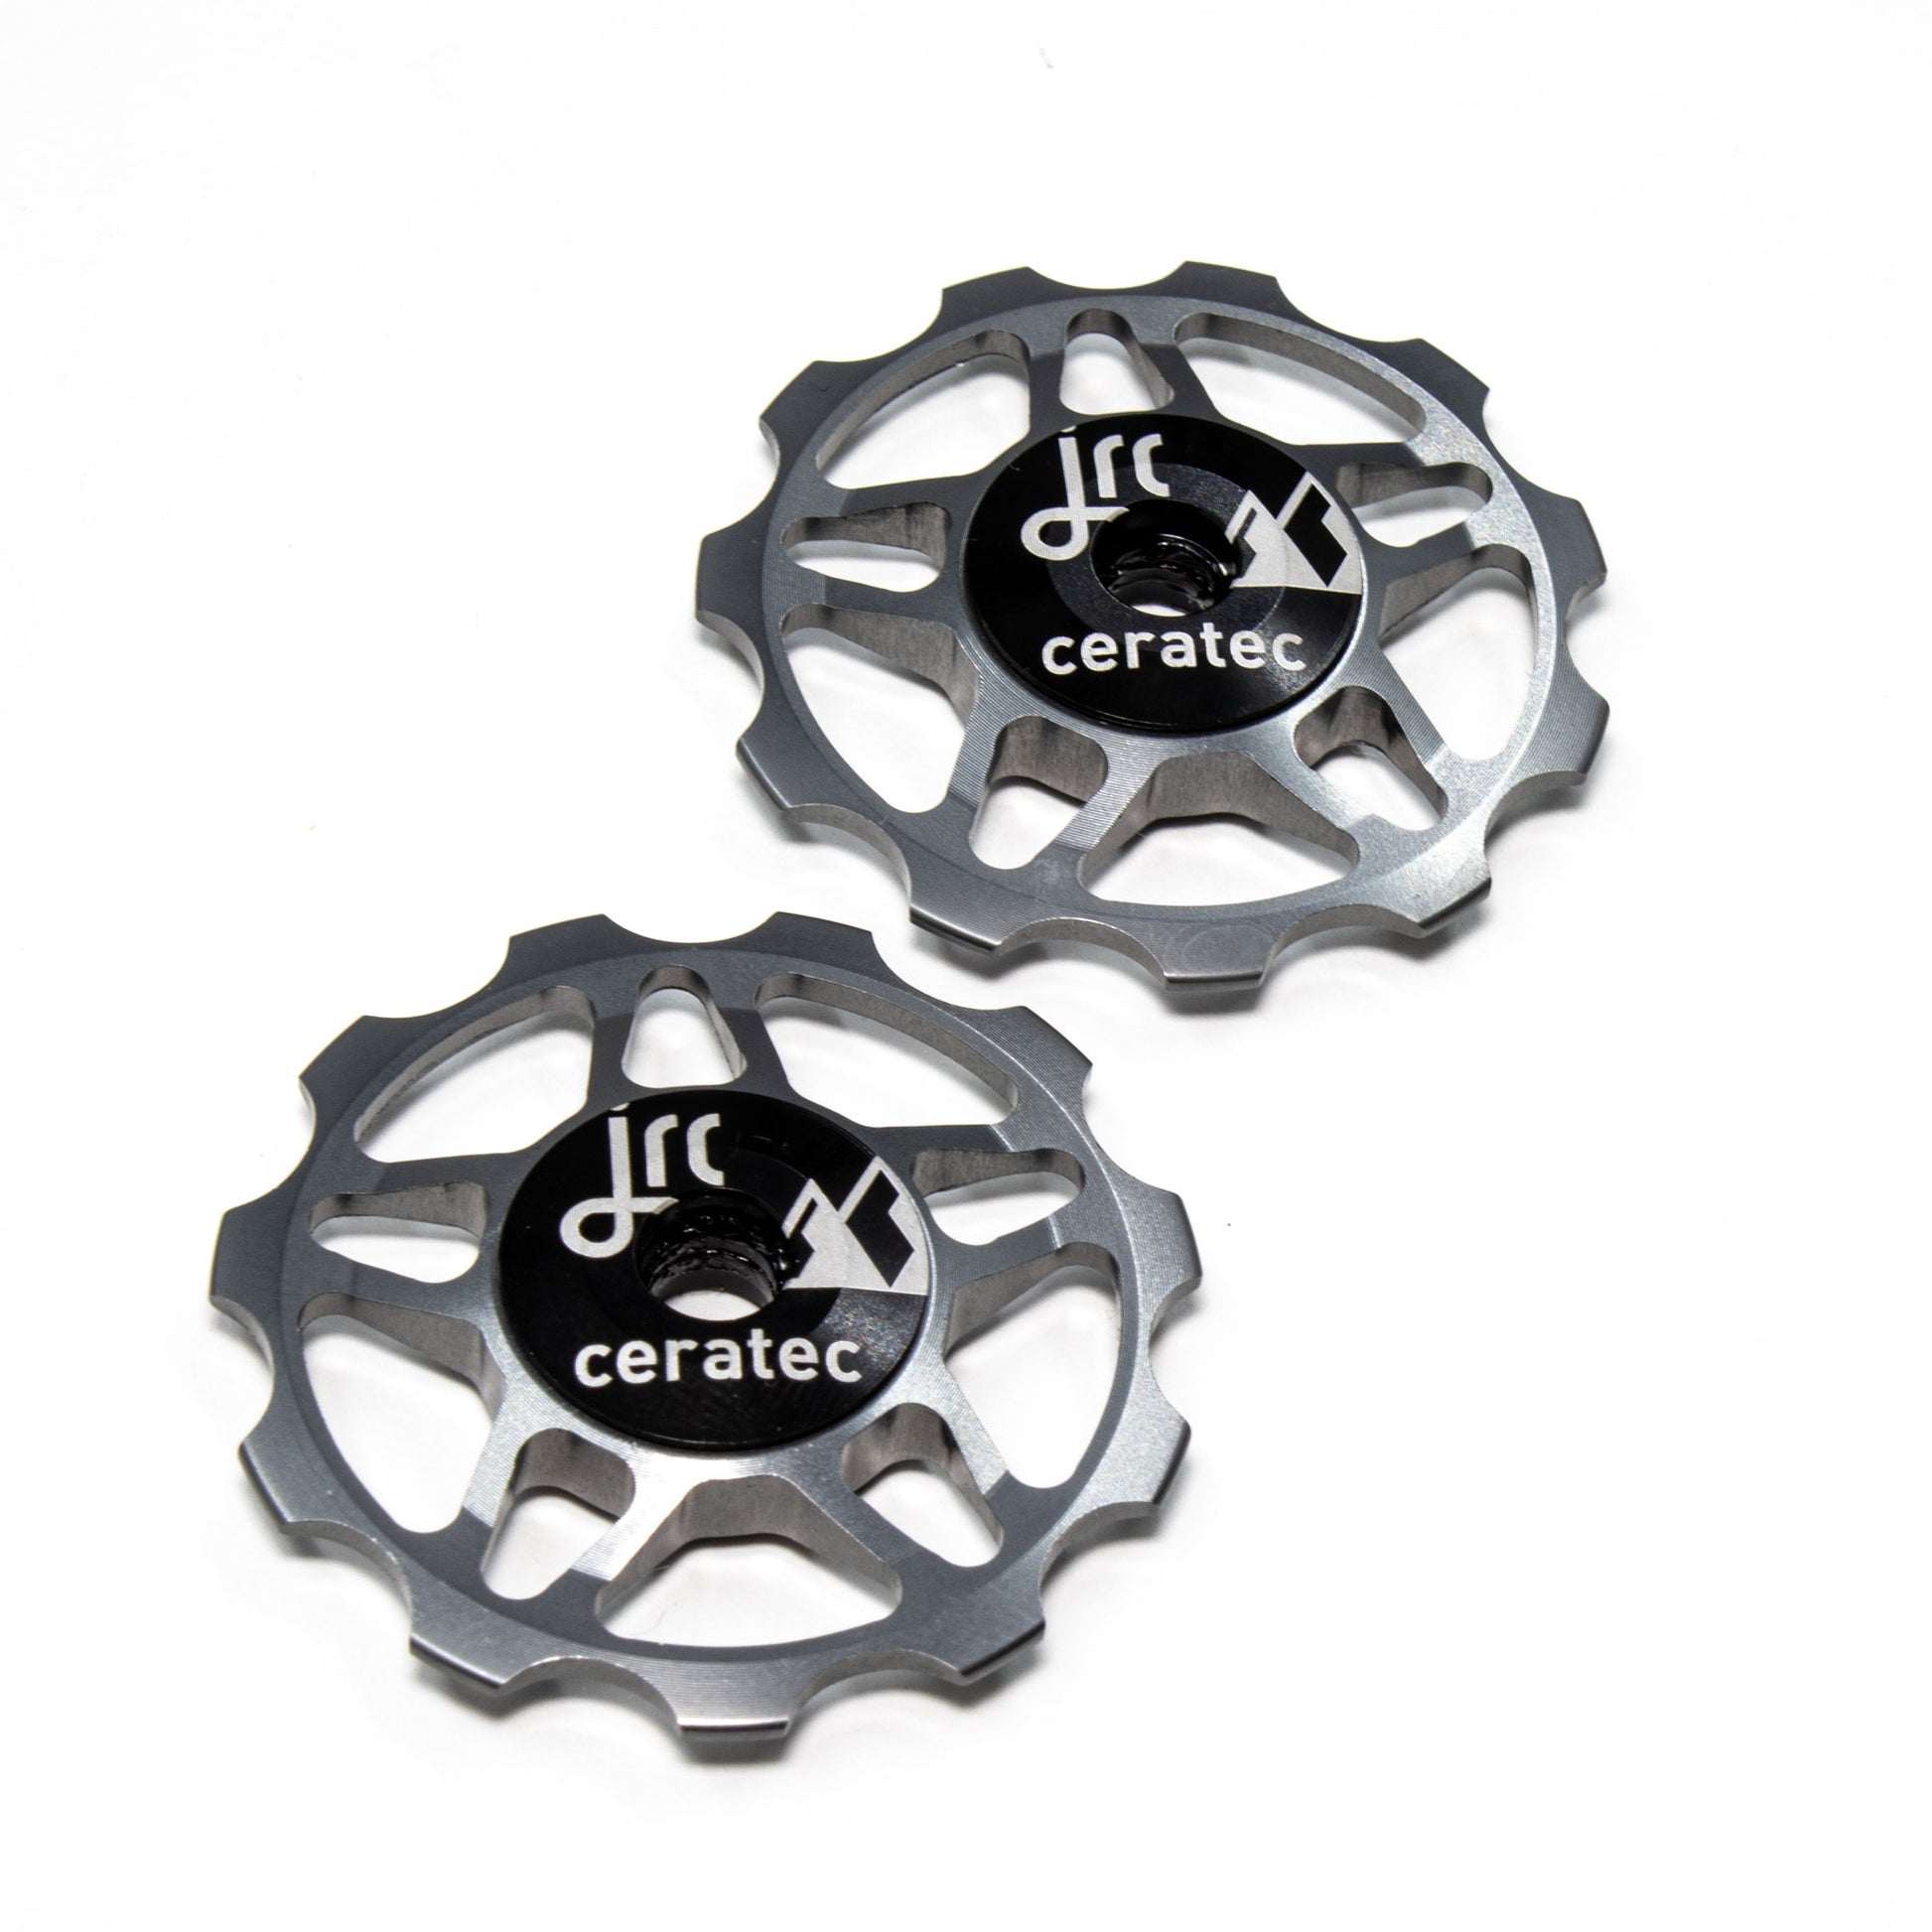 Gunmetal grey, lightweight aluminium 11 tooth pulley wheel set for bicycles, for Shimano SRAM and Campagnolo